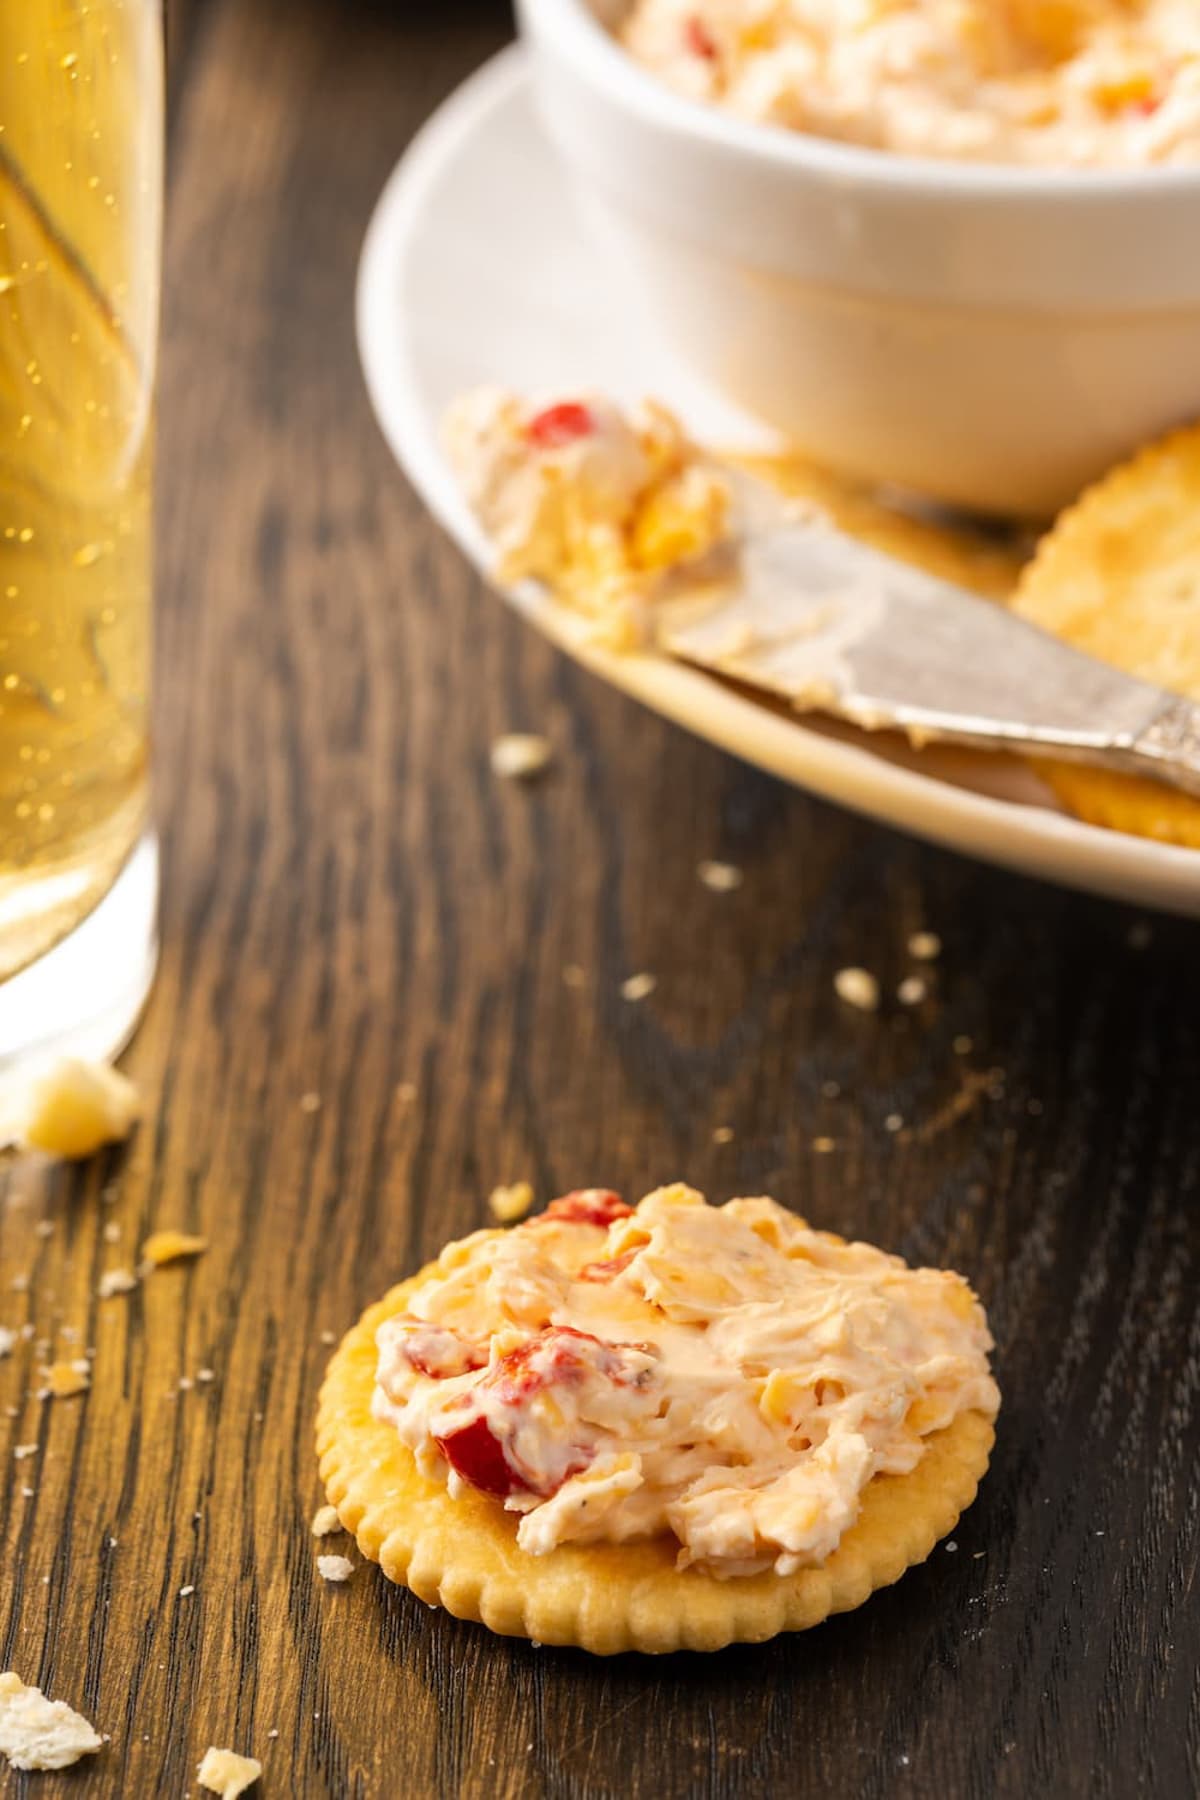 A cracker topped with pimento cheese on a tabletop with a plate of crackers and pimento cheese in the background.